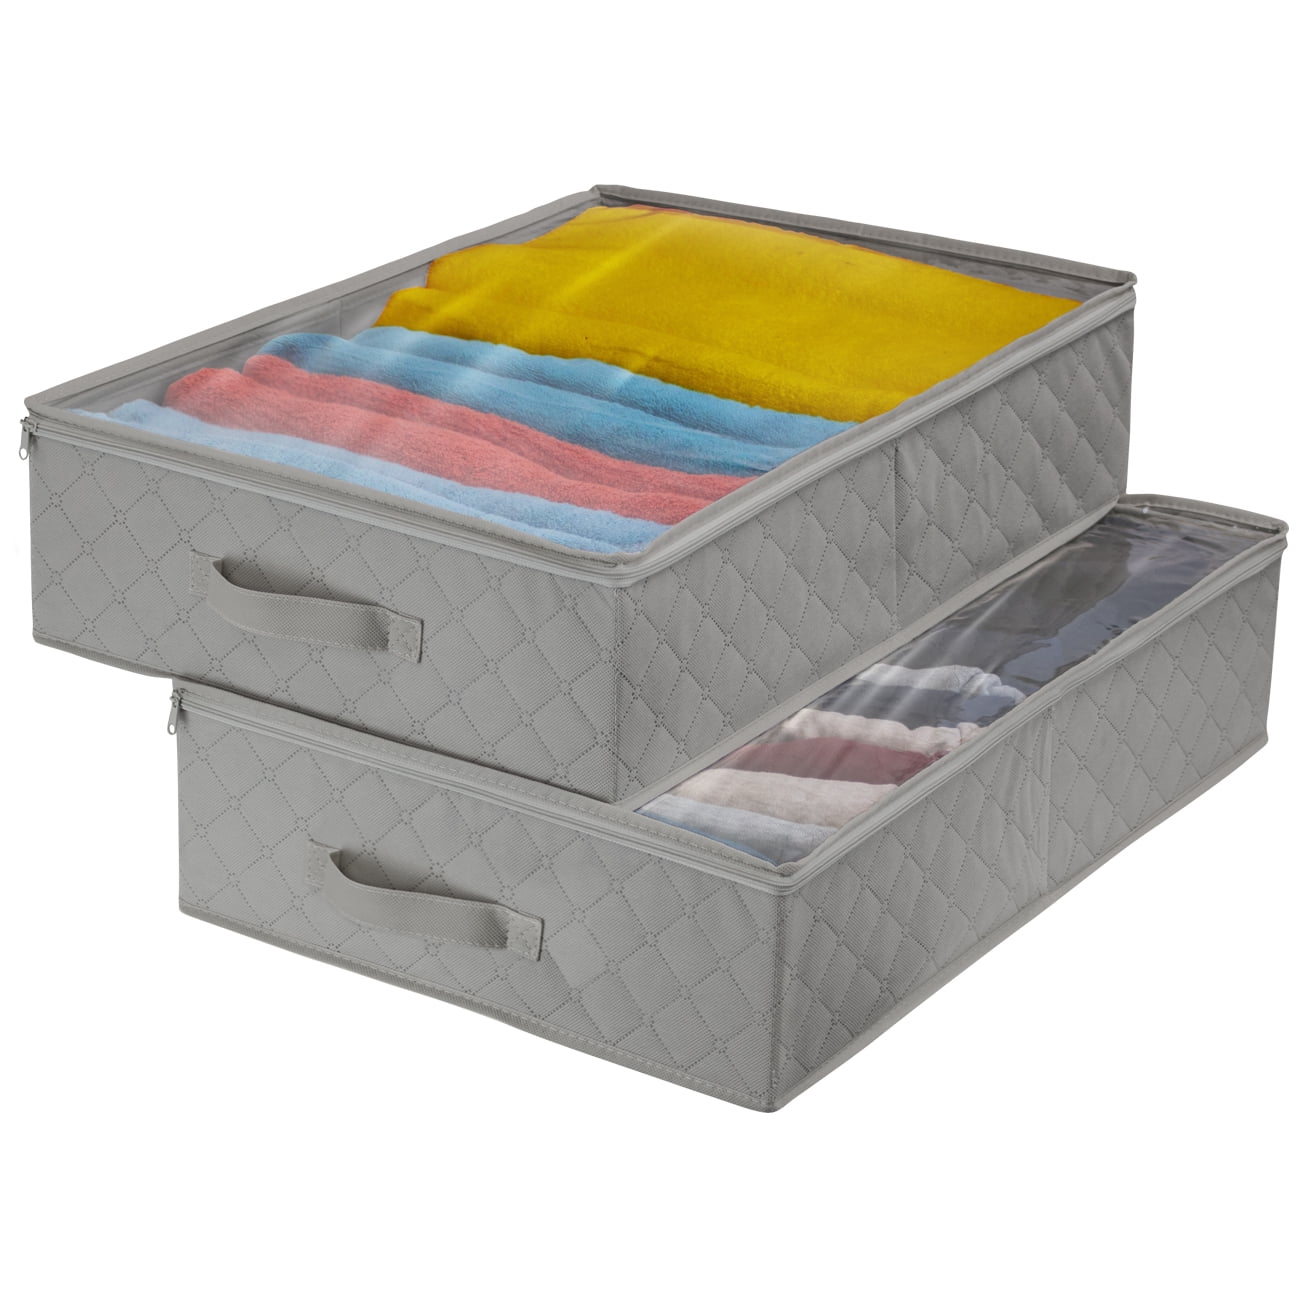 Soft Underbed Storage Containers with 4 Handles & Transparent Lid for Easy find,Durable Material Foldable